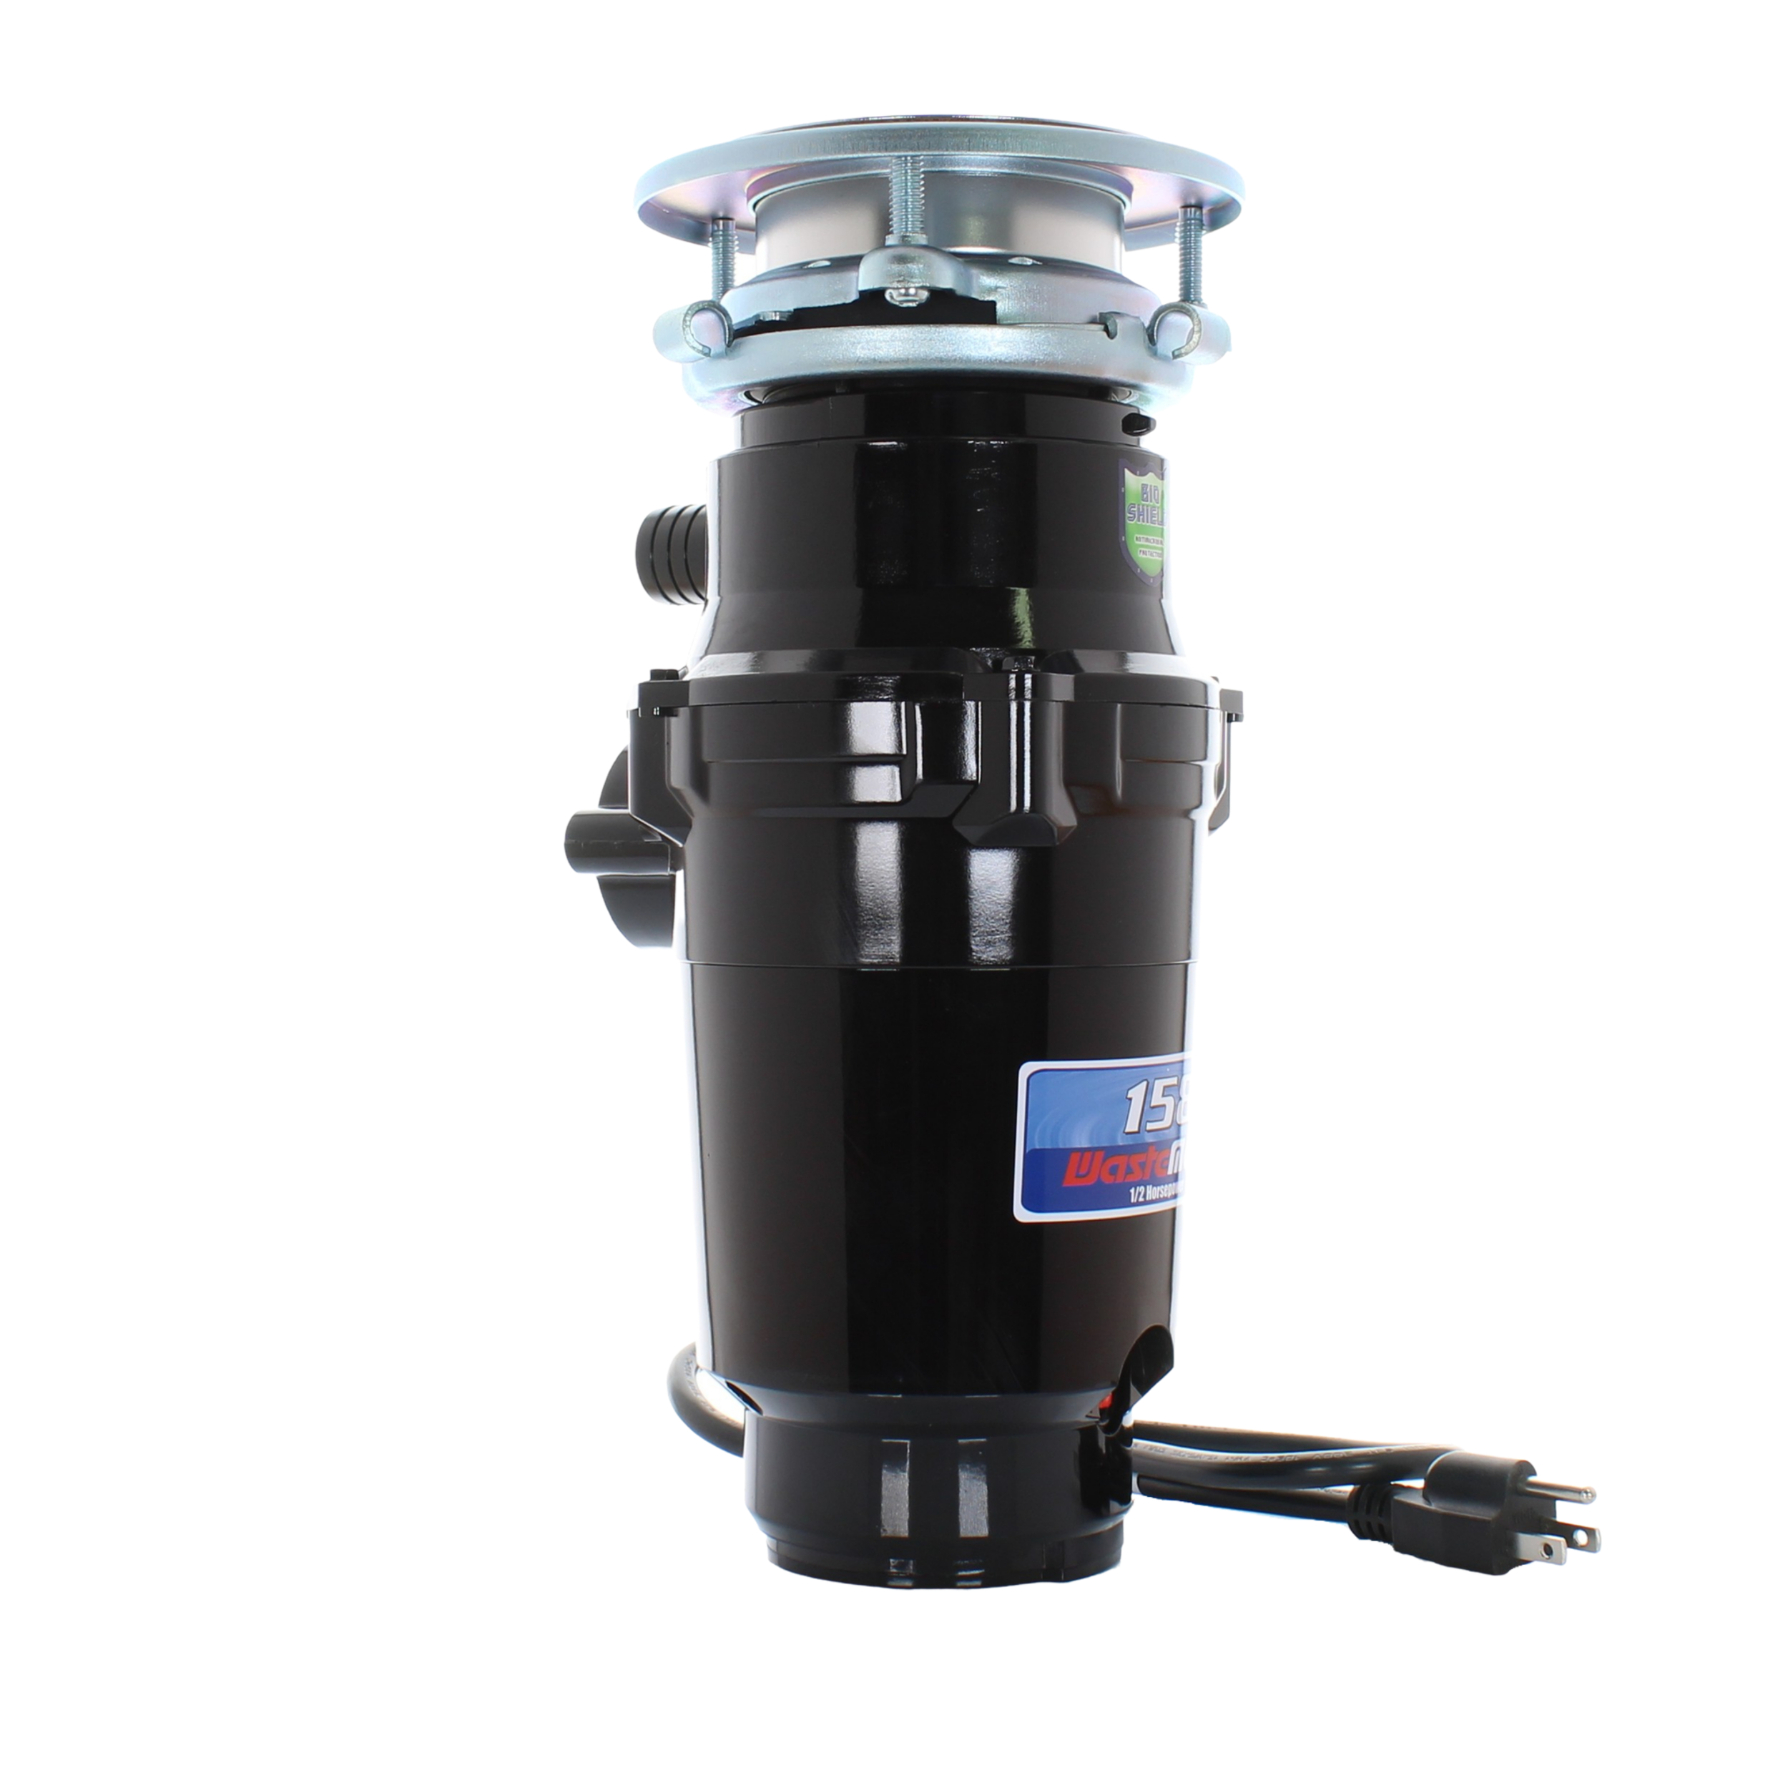 Waste Maid Standard 1/2 HP Continuous Feed Garbage Disposal 10-US-WM-158-3B 